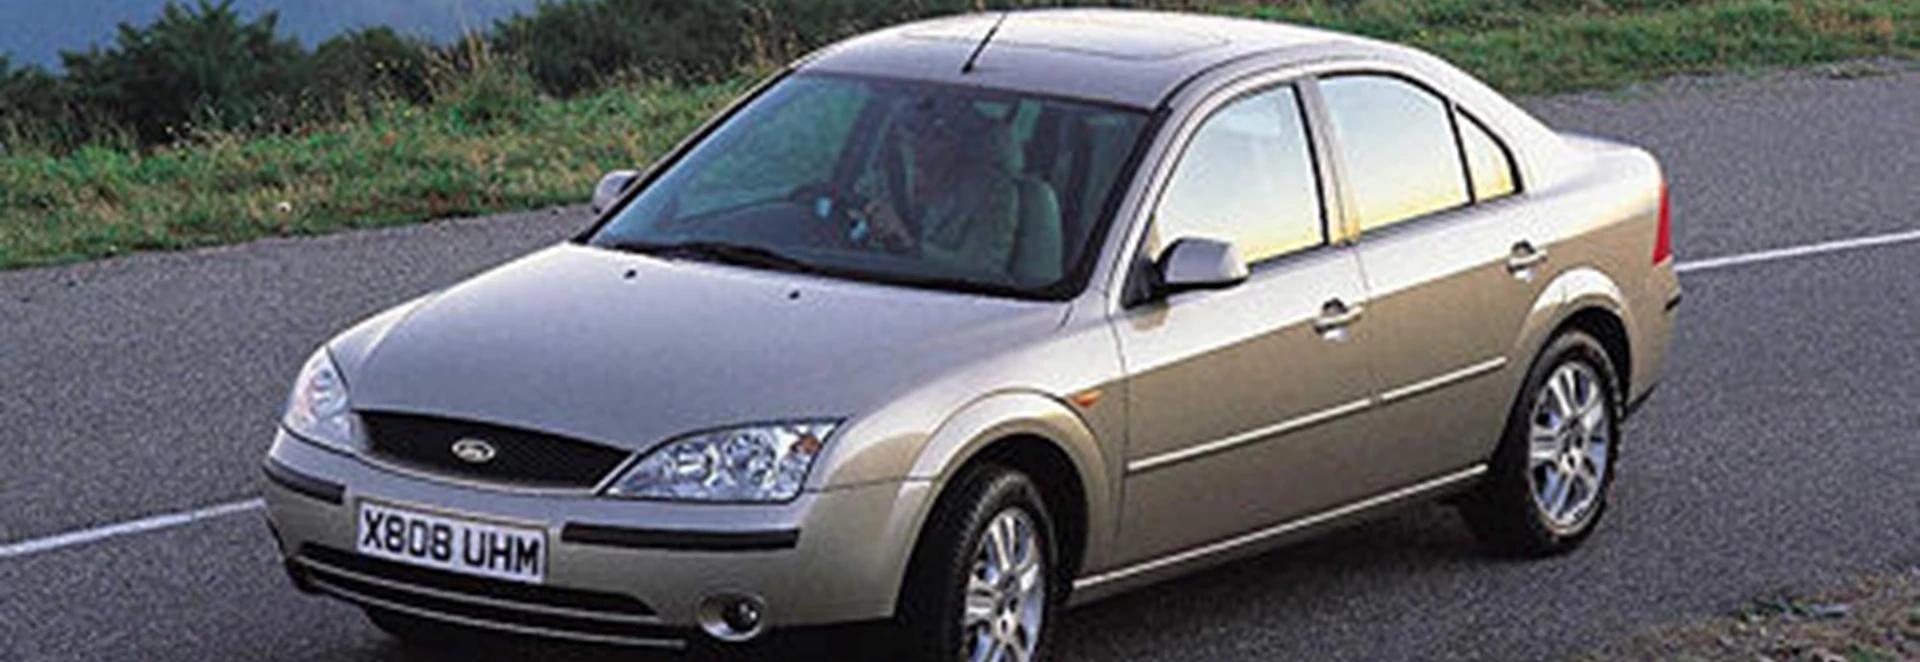 Ford Mondeo 2.0 TD LX (2001) 